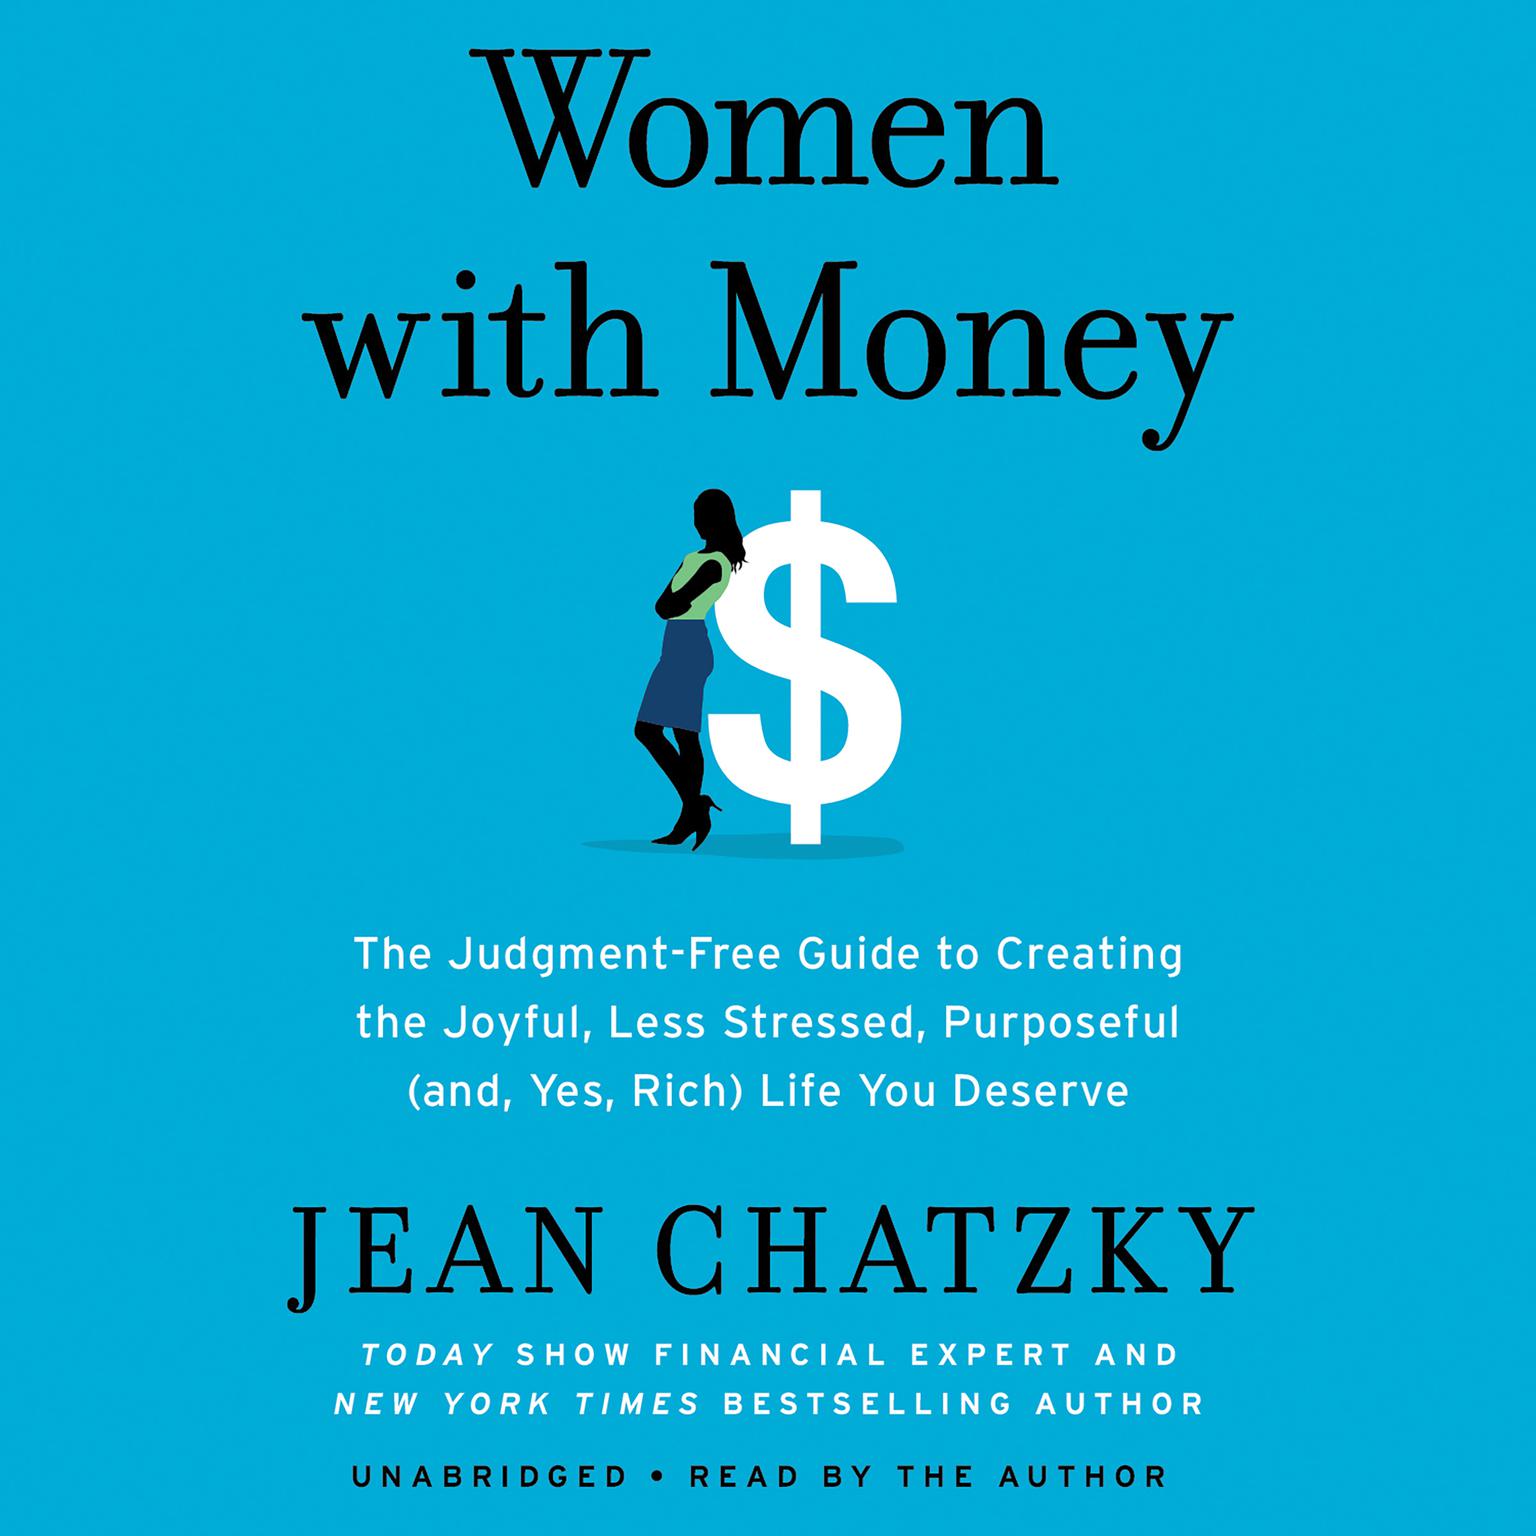 Women with Money: The Judgment-Free Guide to Creating the Joyful, Less Stressed, Purposeful (and, Yes, Rich) Life You Deserve Audiobook, by Jean Chatzky